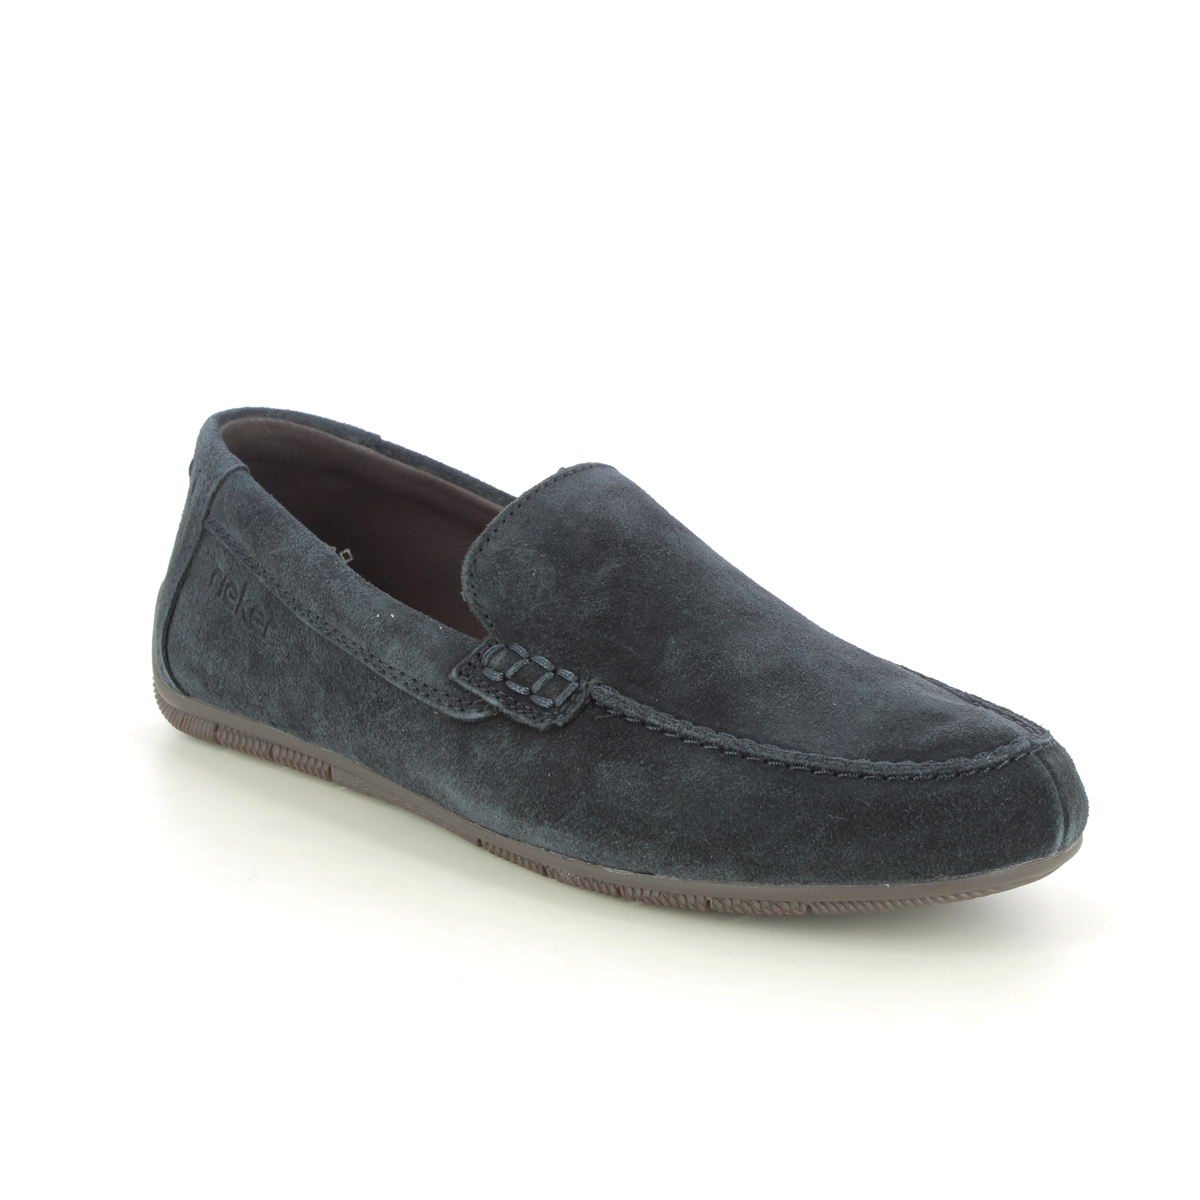 Rieker 09557-14 Navy Suede Mens Loafers in a Plain Leather in Size 45